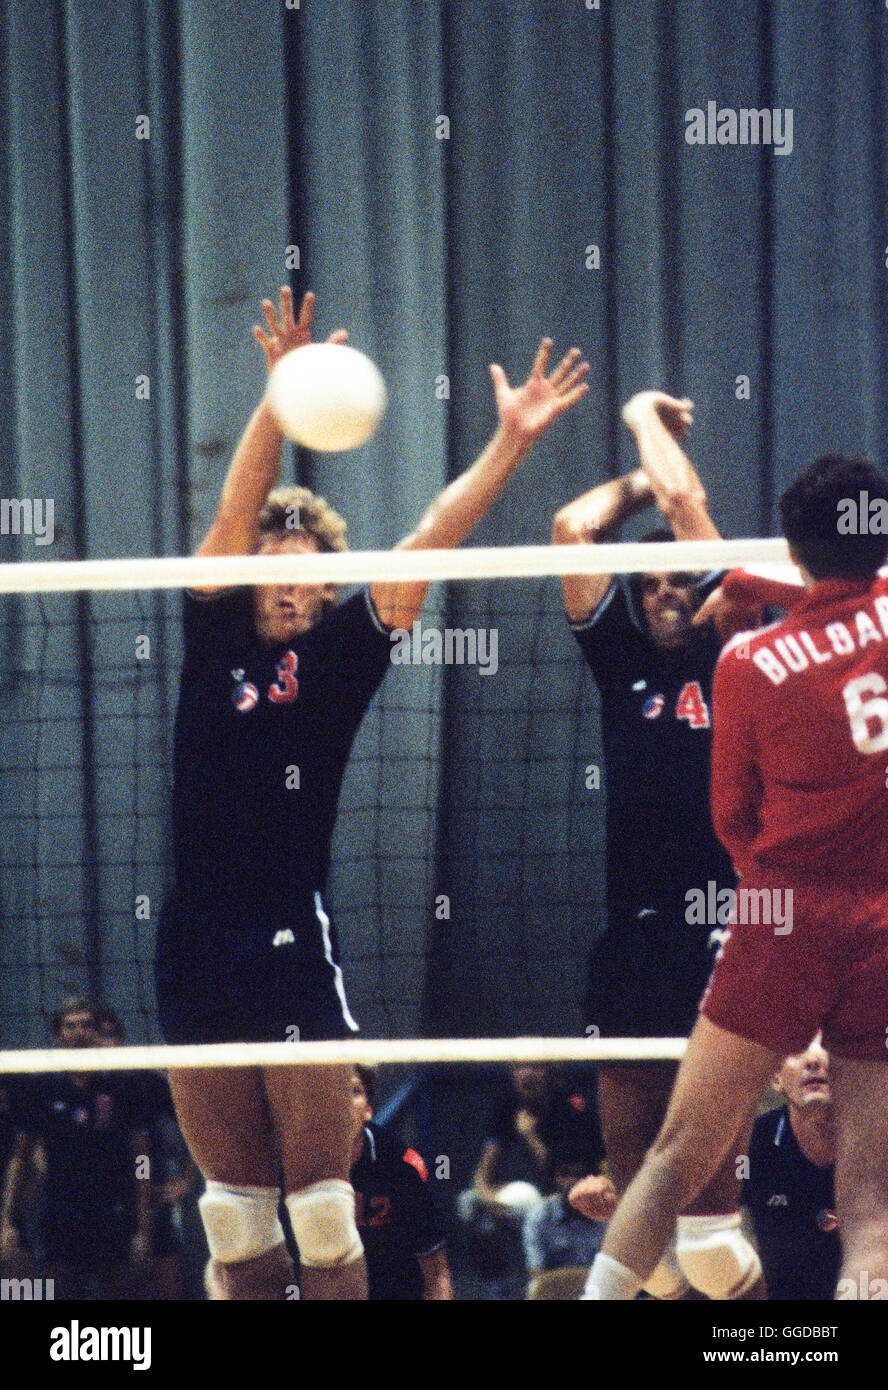 USA #3 Steve Salmons, #4 Paul Sunderland in action during match with Bulgaria at Long Beach Arena, Long Beach, CA Stock Photo